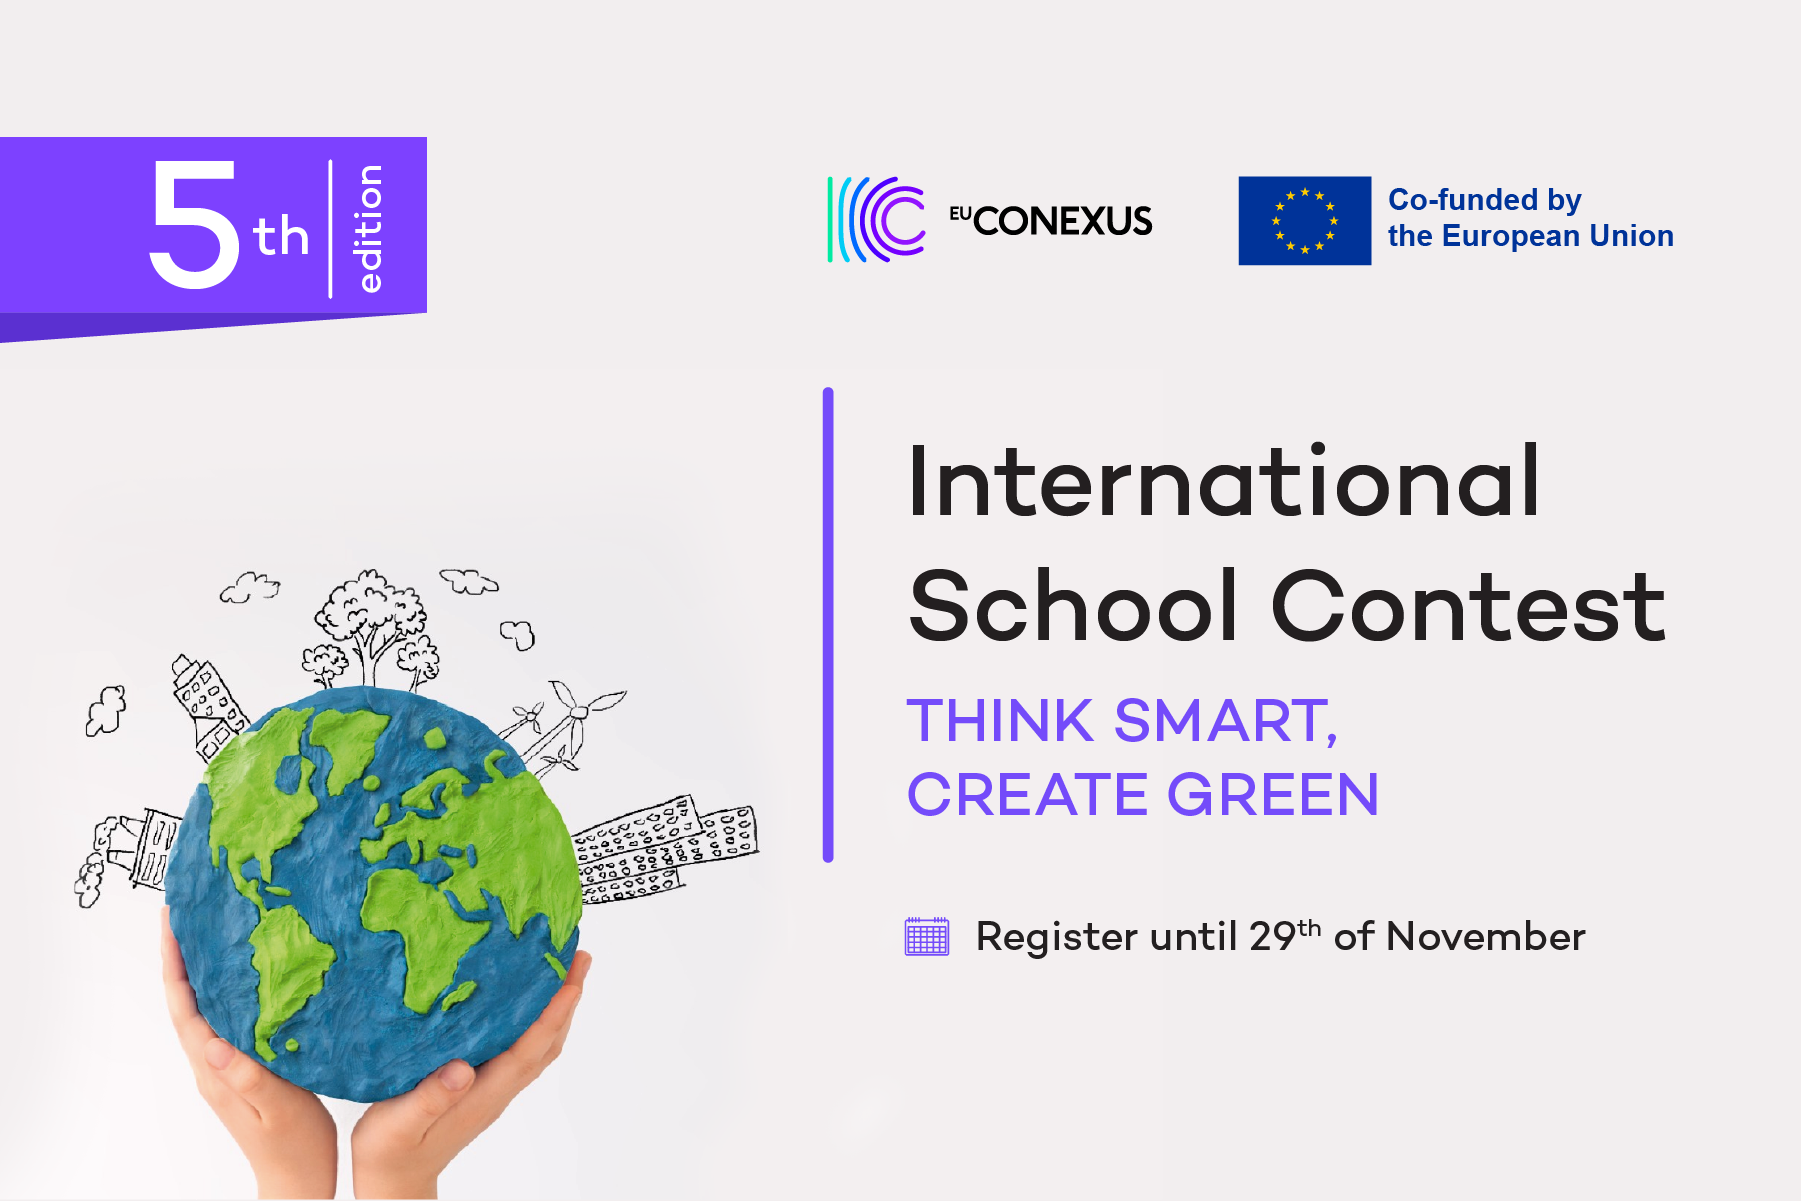 Welcome to the 5th edition of The EU-CONEXUS School Contest “Think Smart, Create Green”